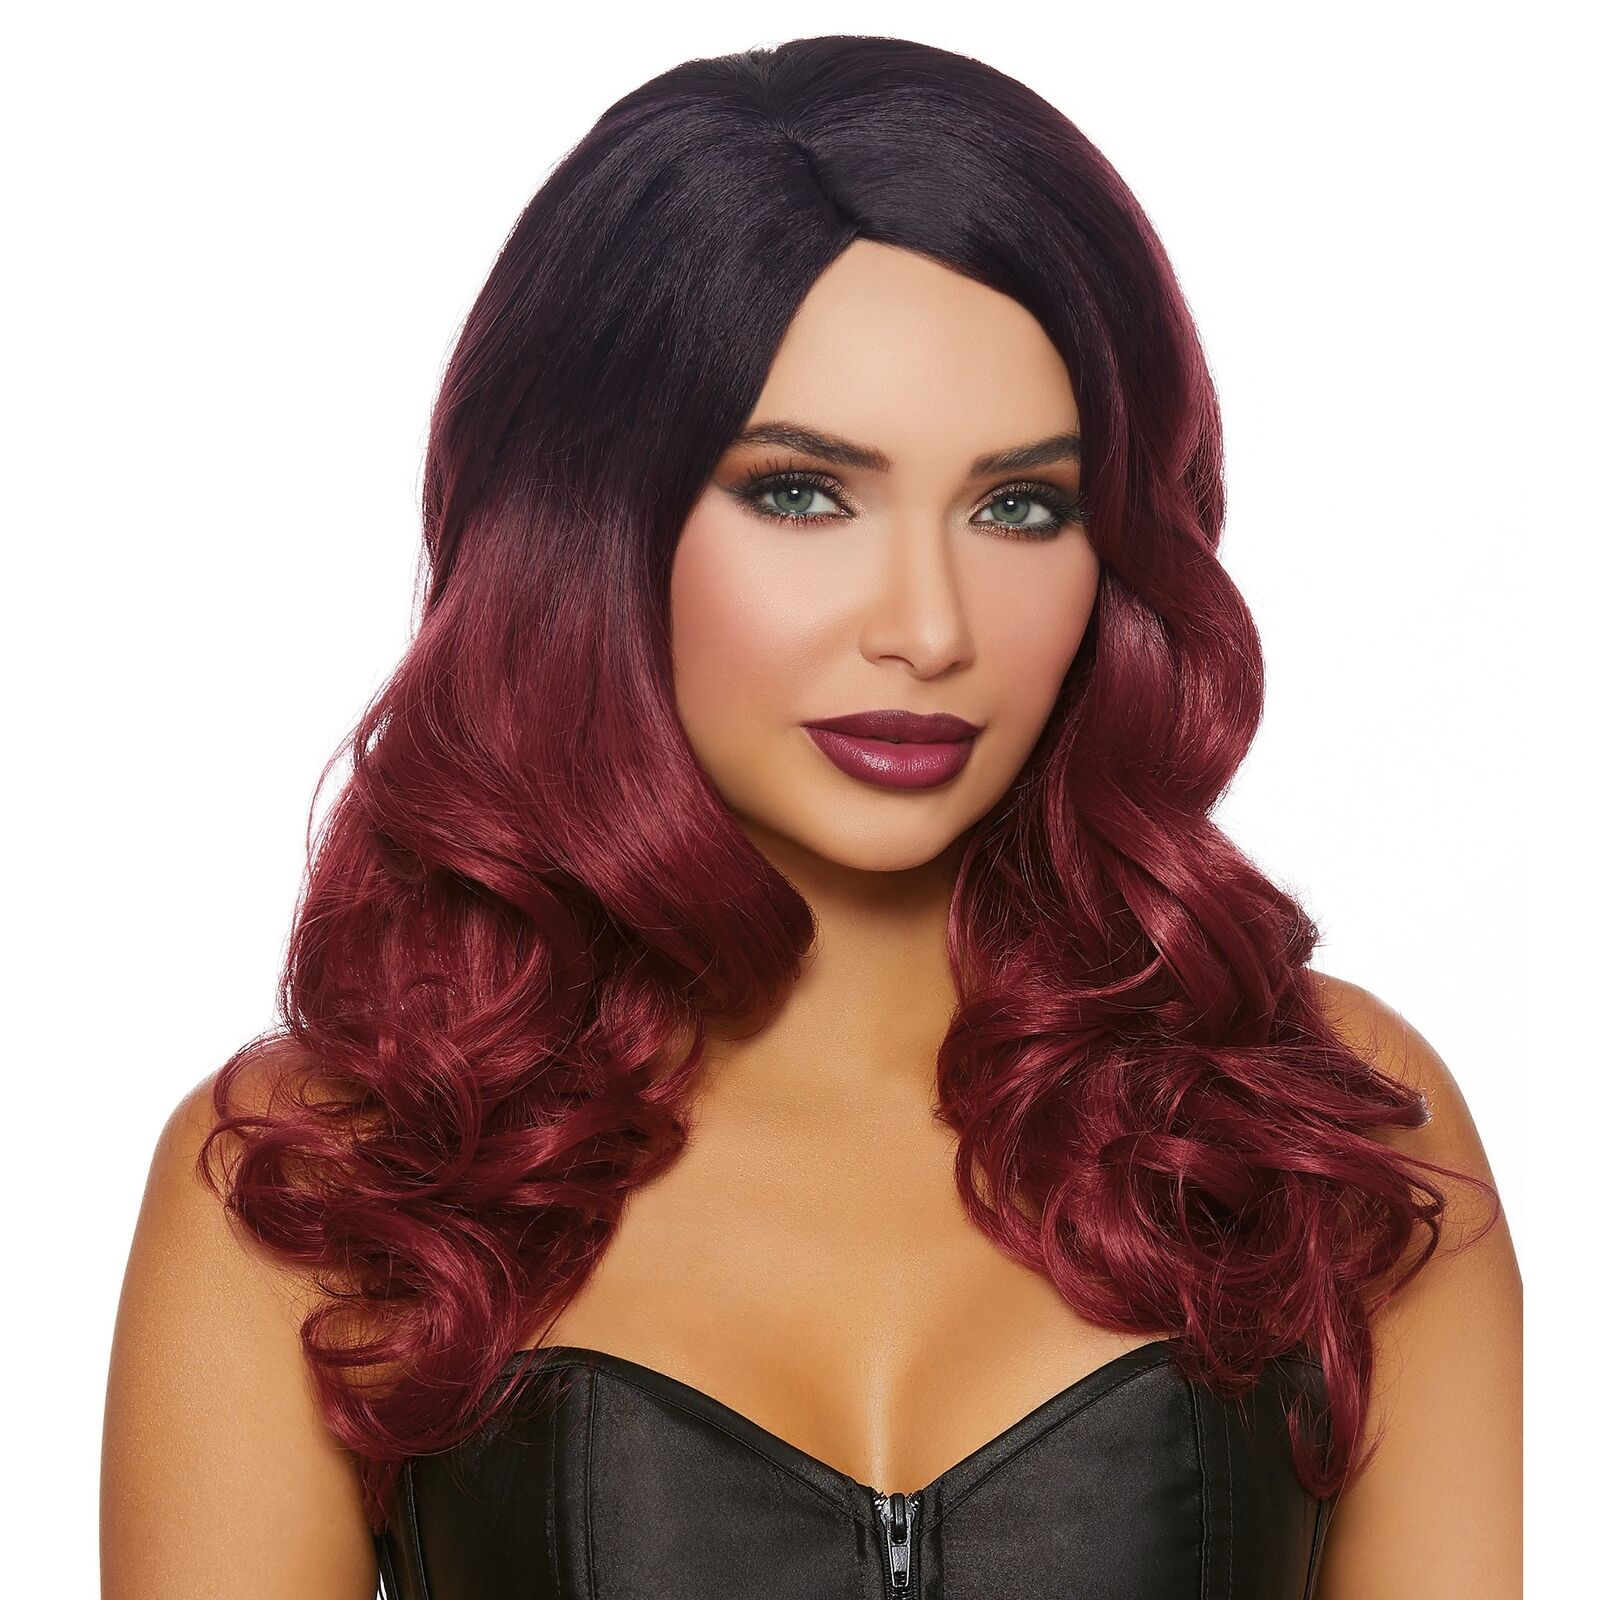 Black Burgundy Long Wavy Ombre Wig Adult Halloween Accessory